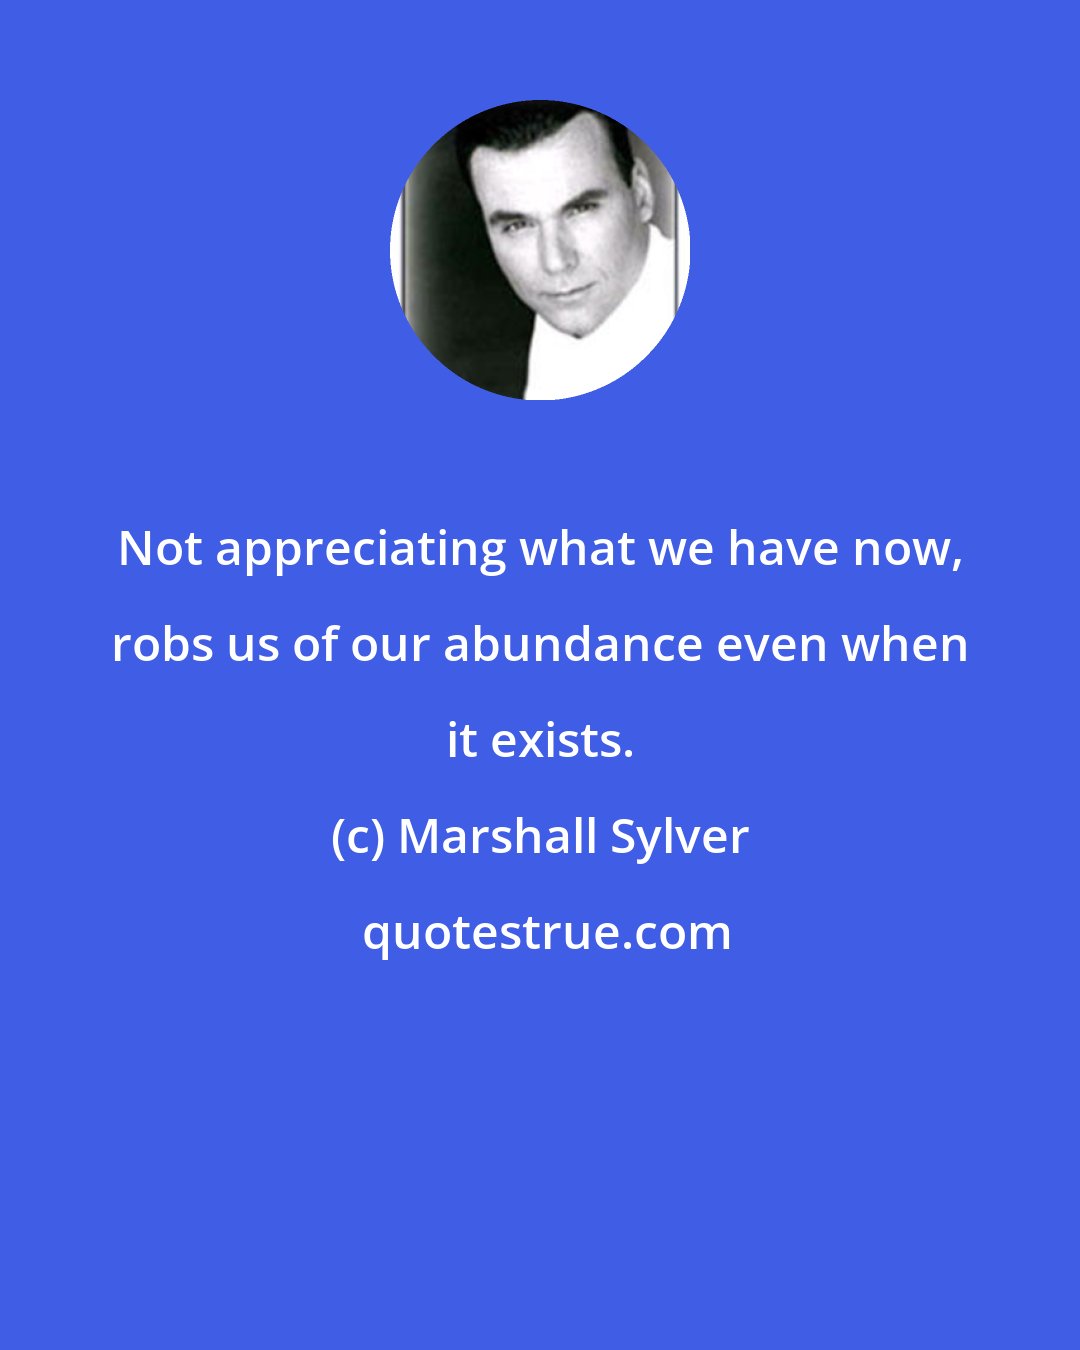 Marshall Sylver: Not appreciating what we have now, robs us of our abundance even when it exists.